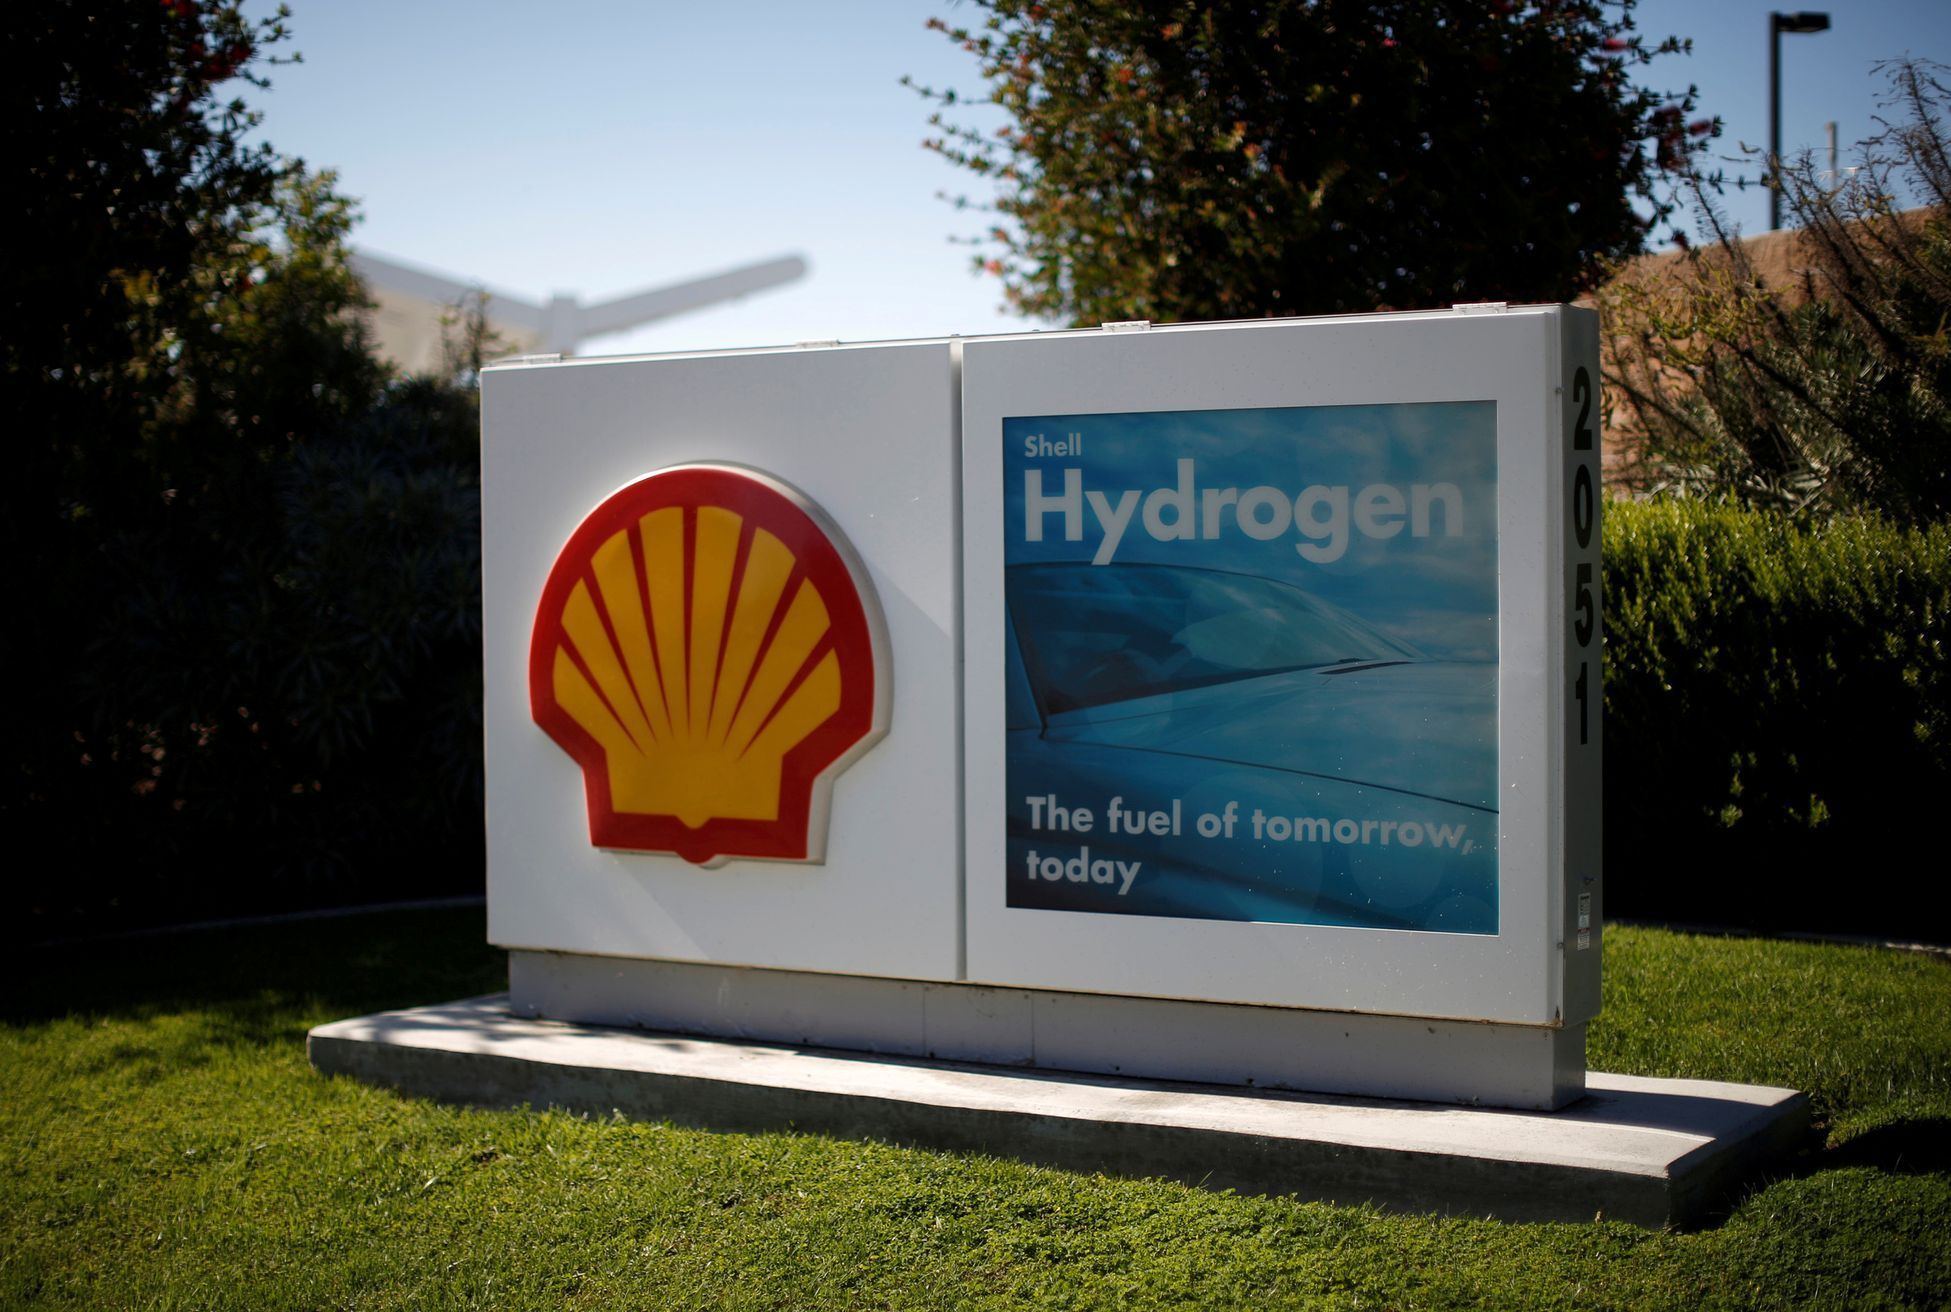 FILE PHOTO: A Shell hydrogen station is seen in Torrance